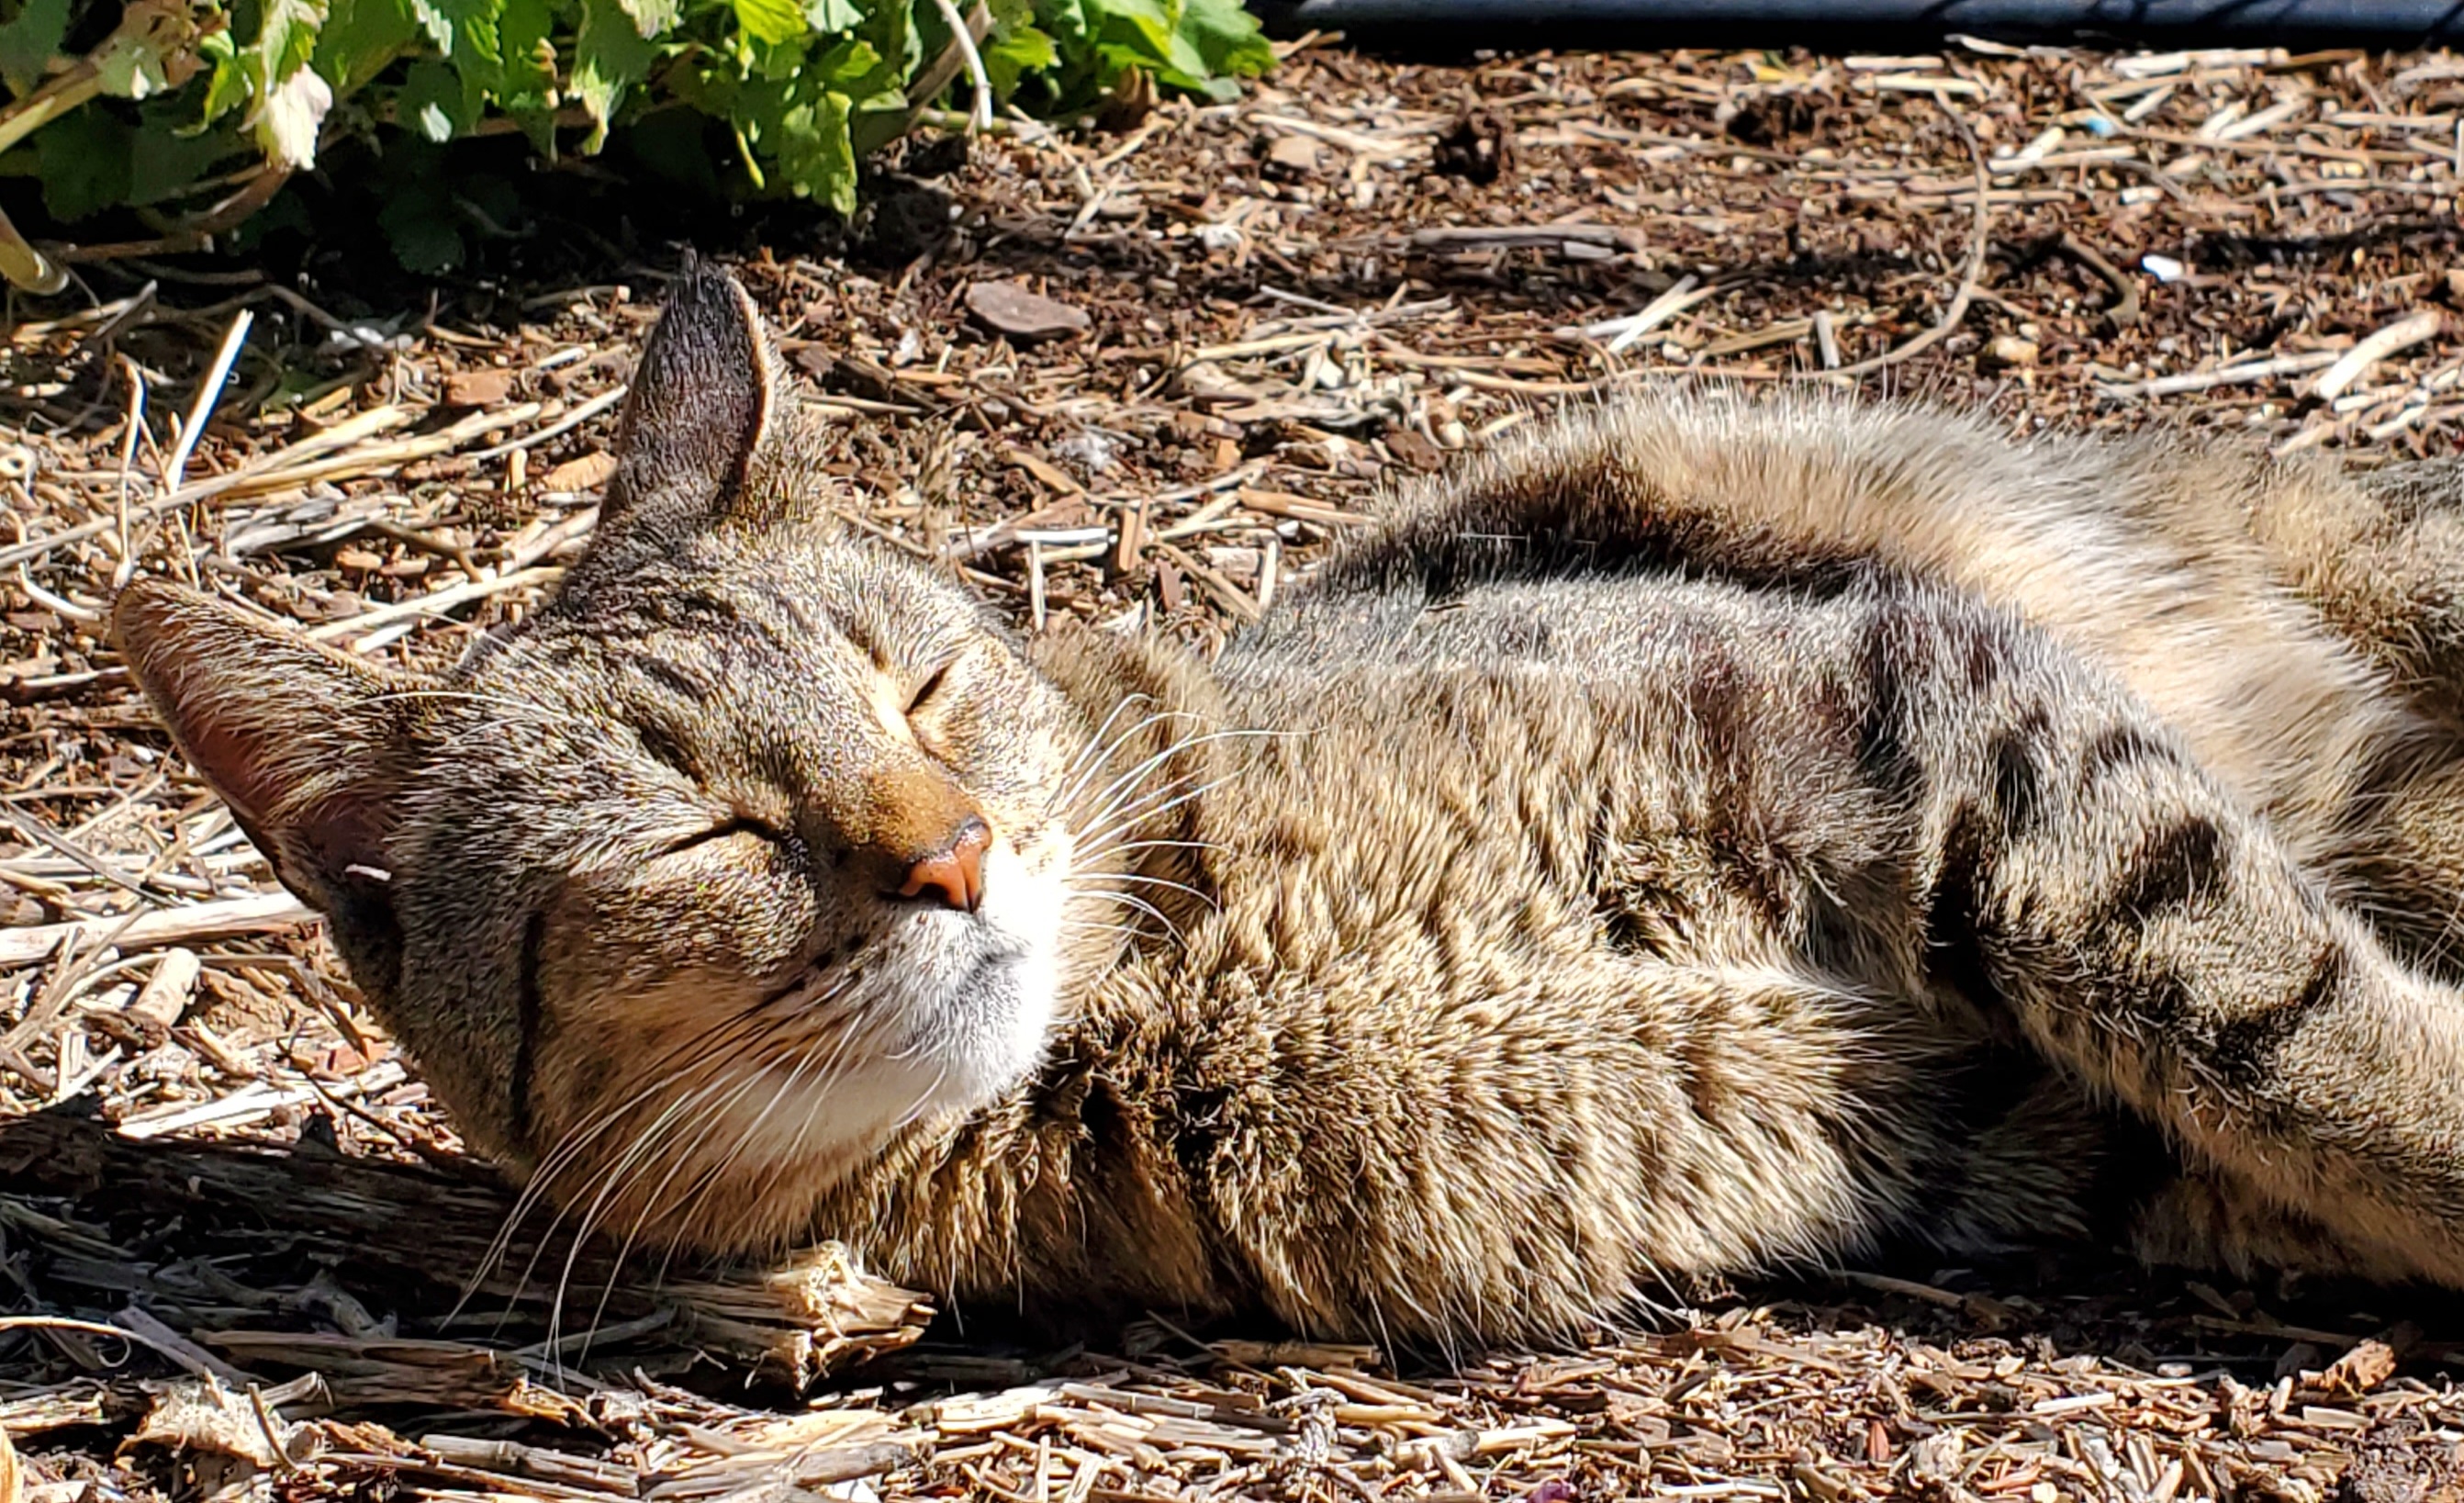 Black tabby relaxing in the sun on the dirt ground